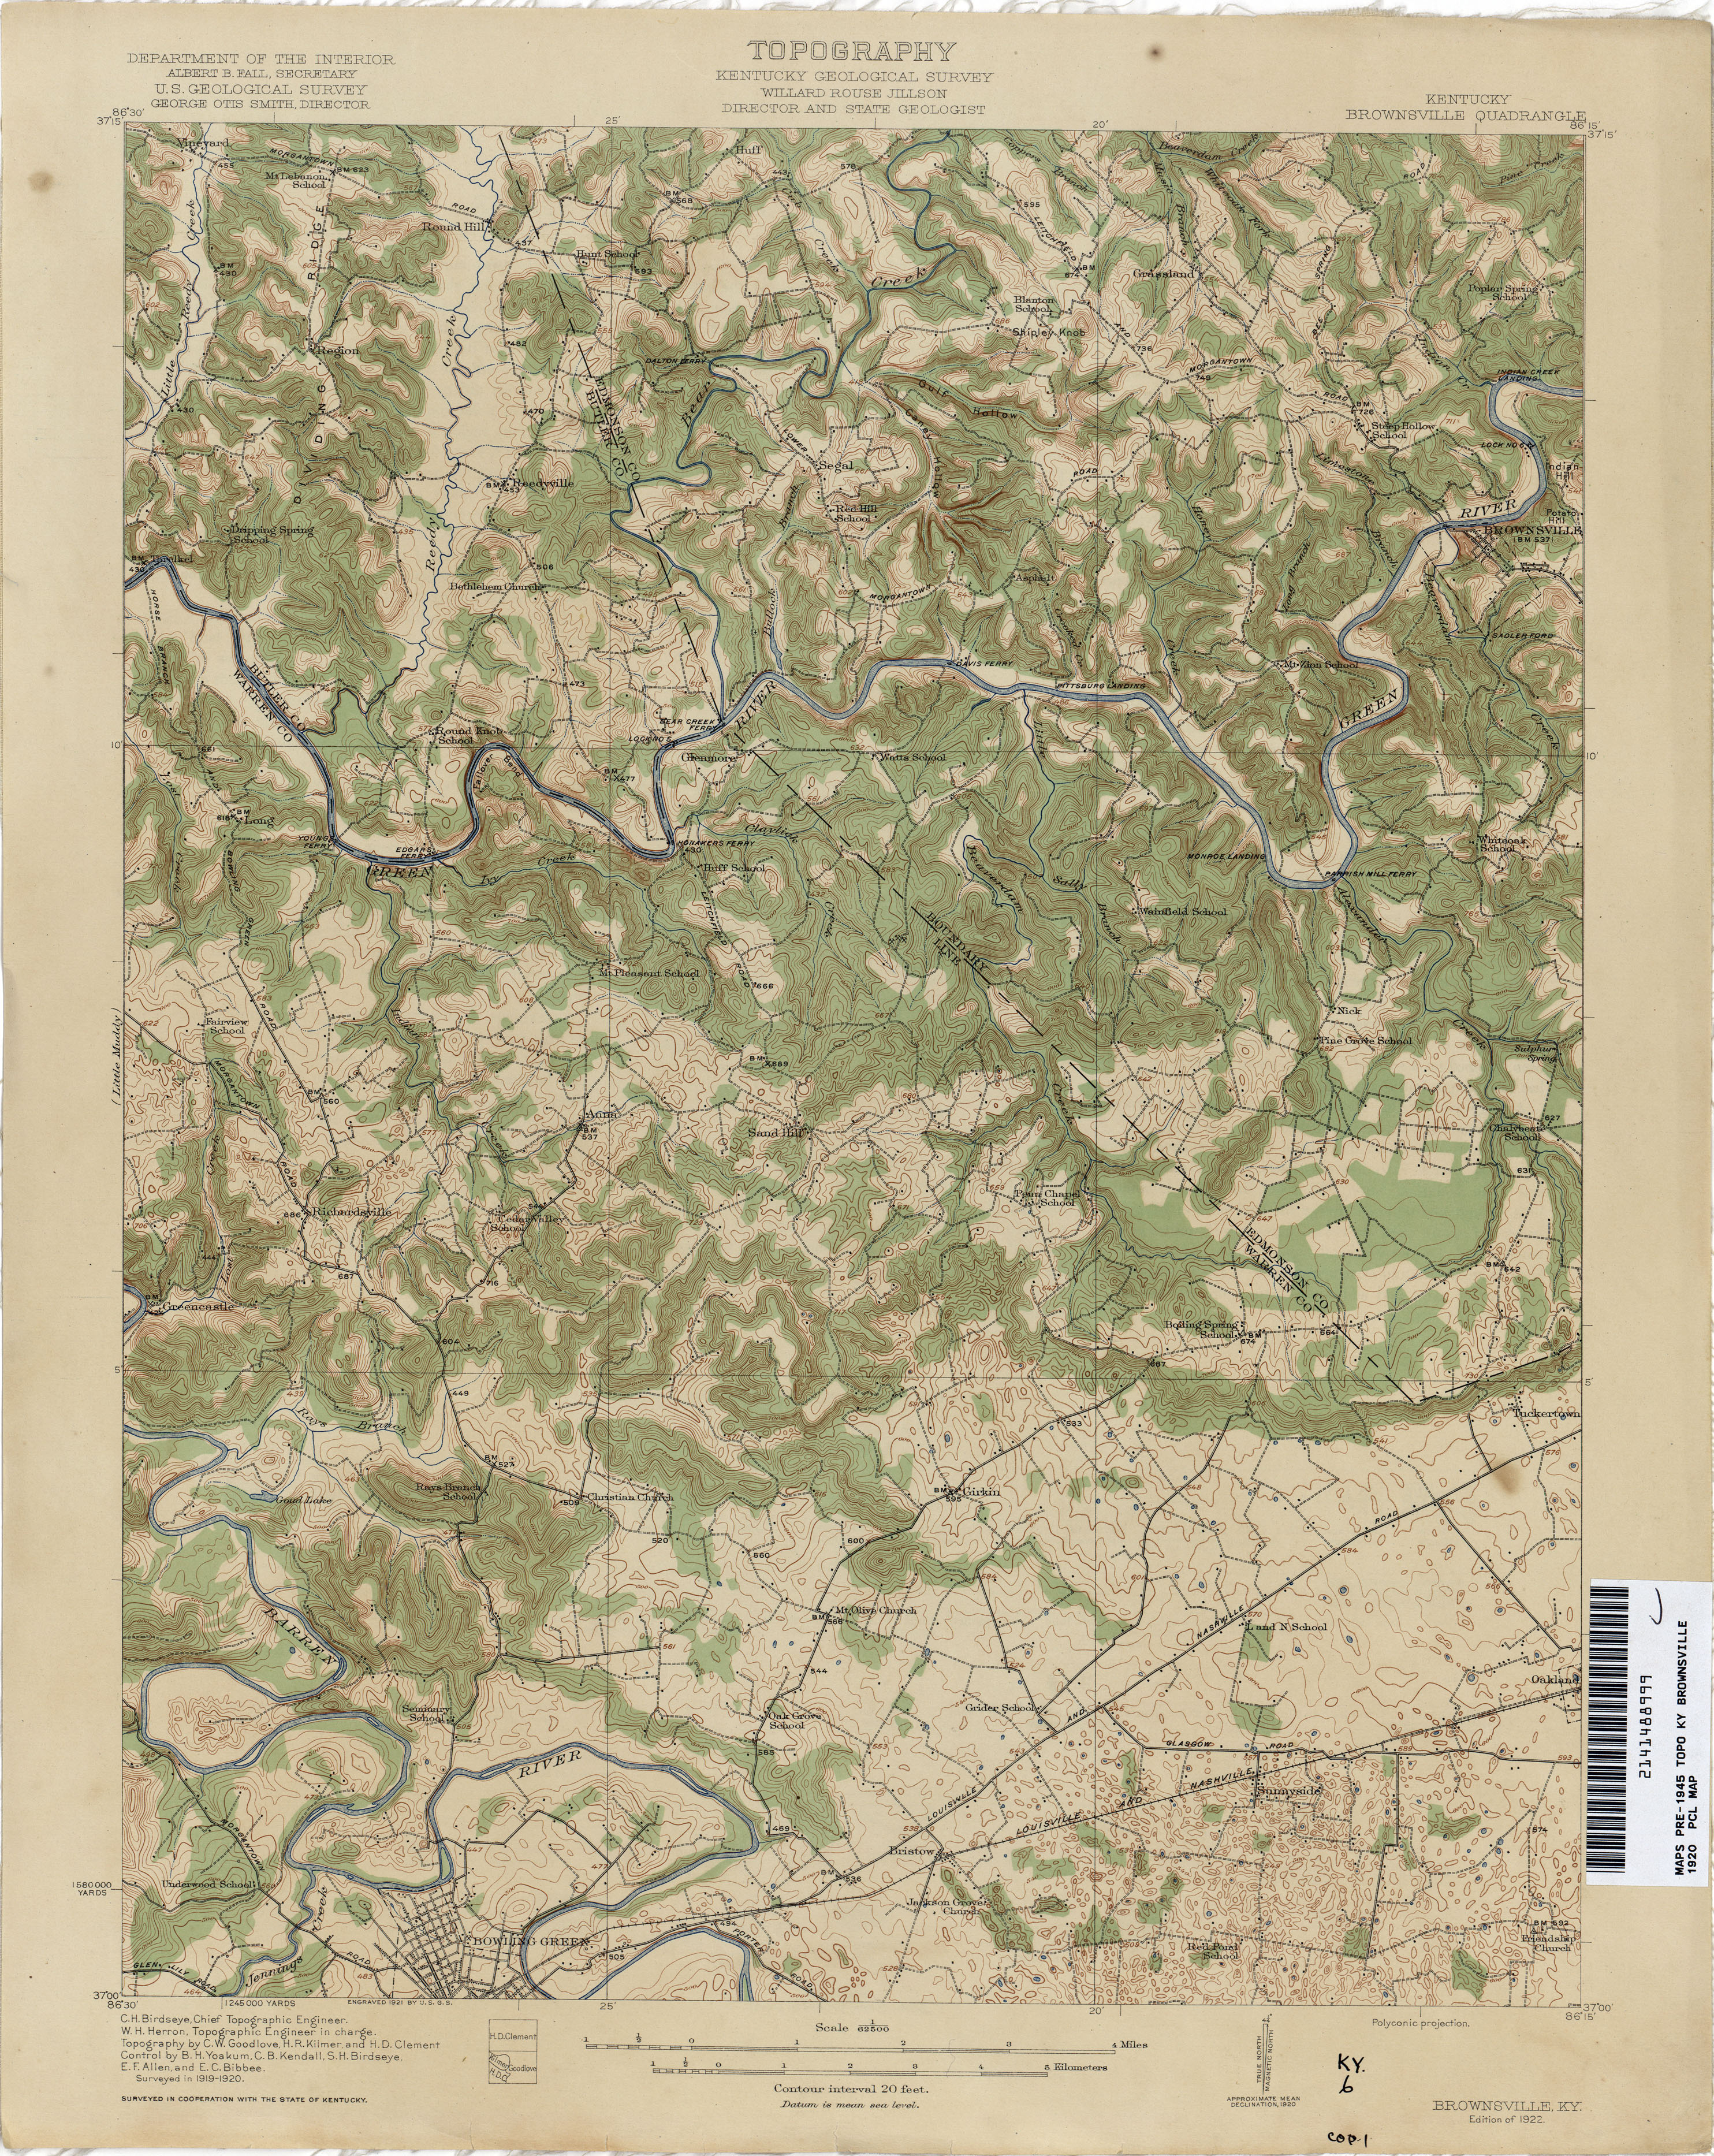 Kentucky Historical Topographic Maps Perry Castaneda Map